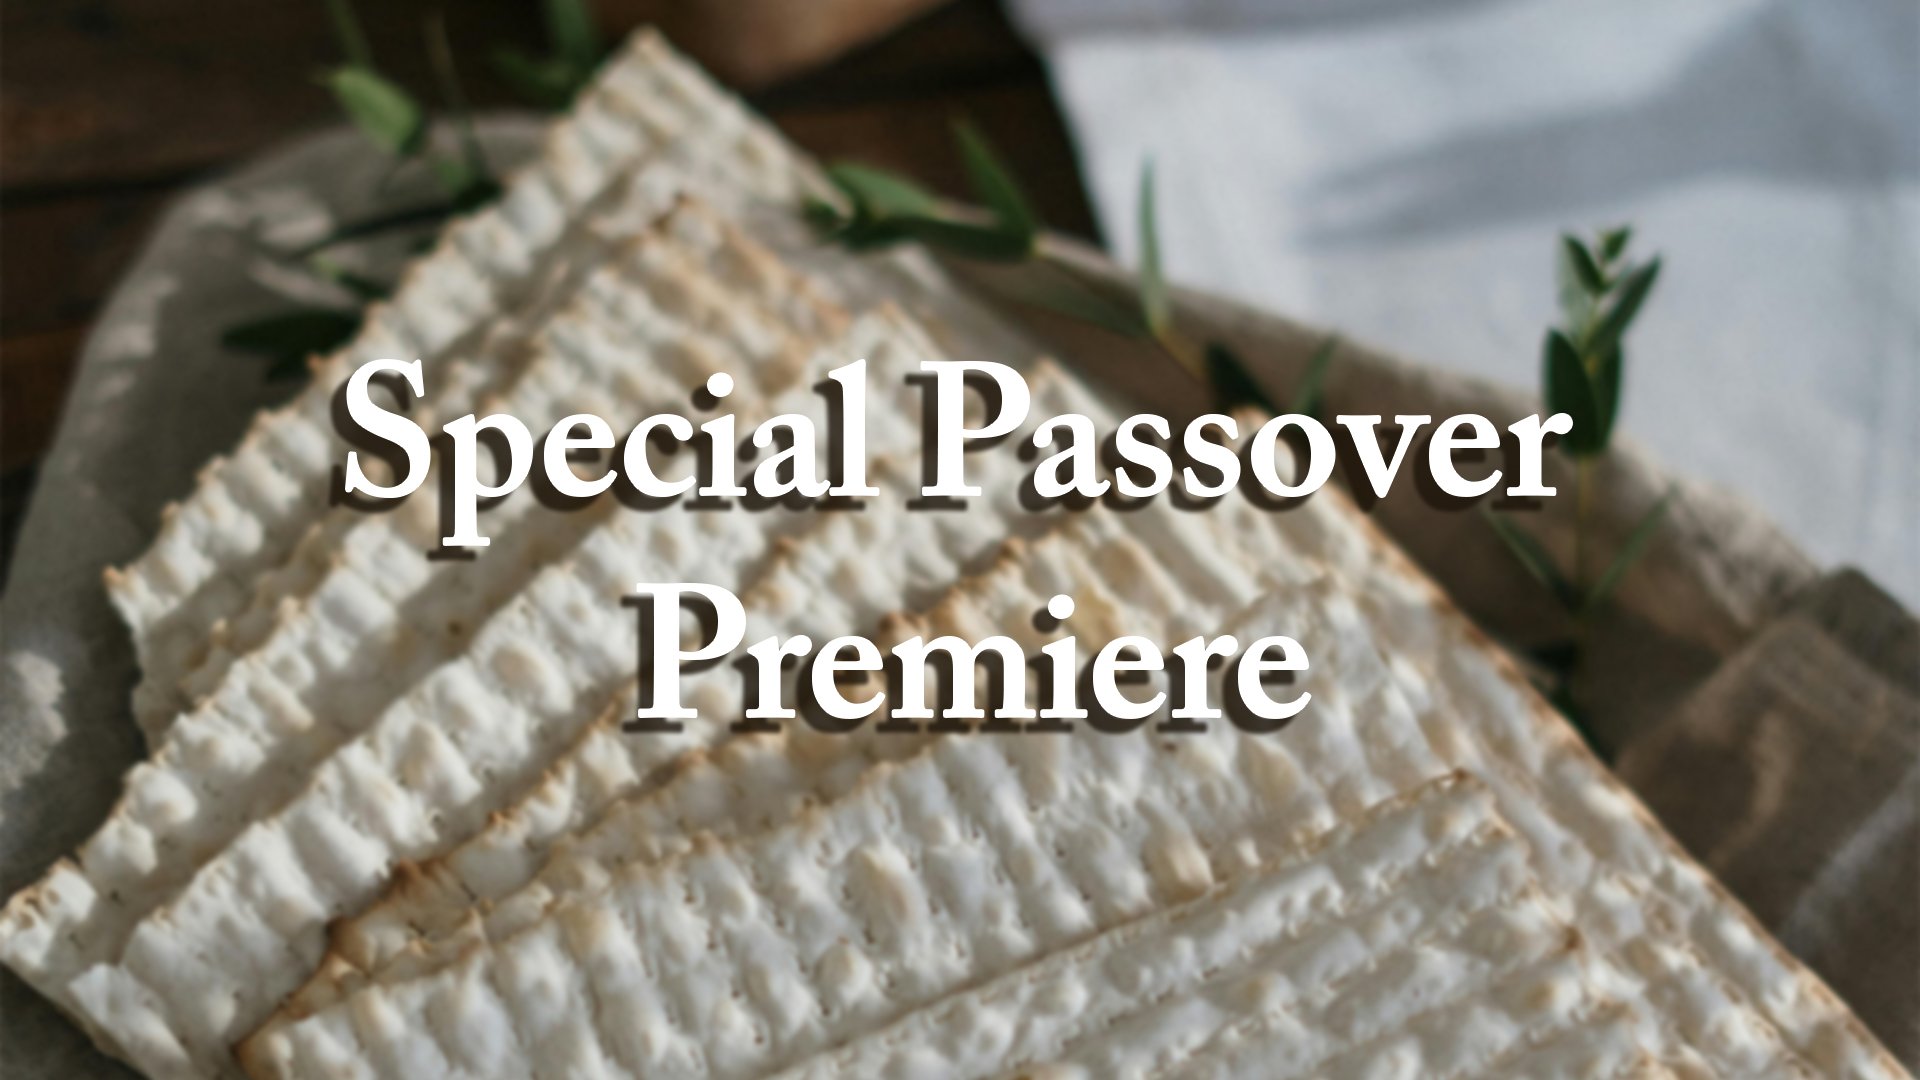 Soecial Passover premiere .jpg